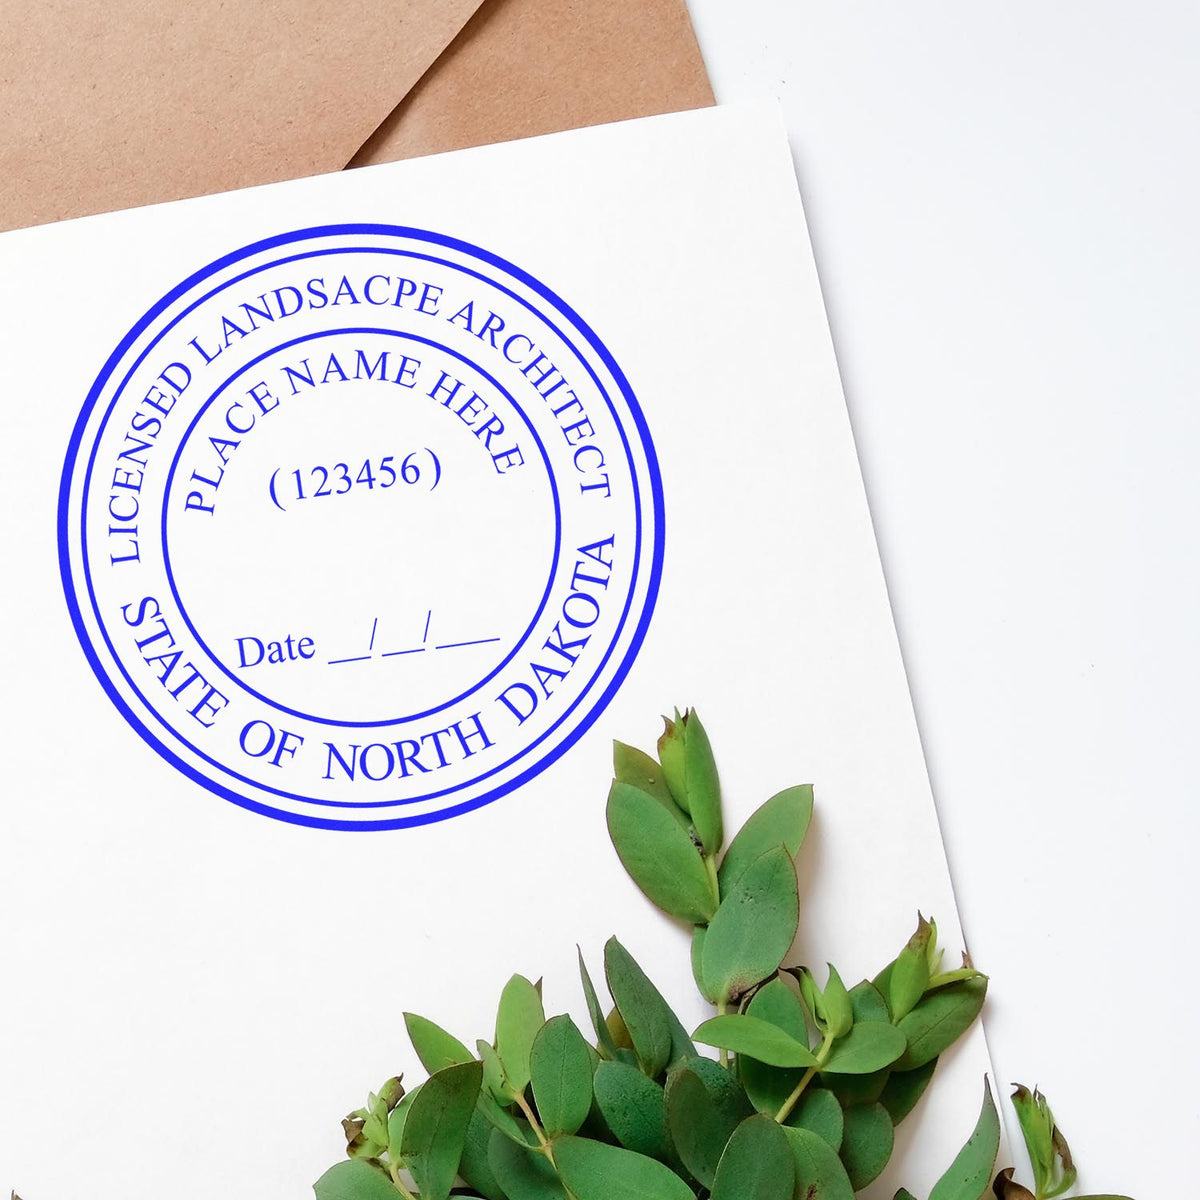 The Digital North Dakota Landscape Architect Stamp stamp impression comes to life with a crisp, detailed photo on paper - showcasing true professional quality.